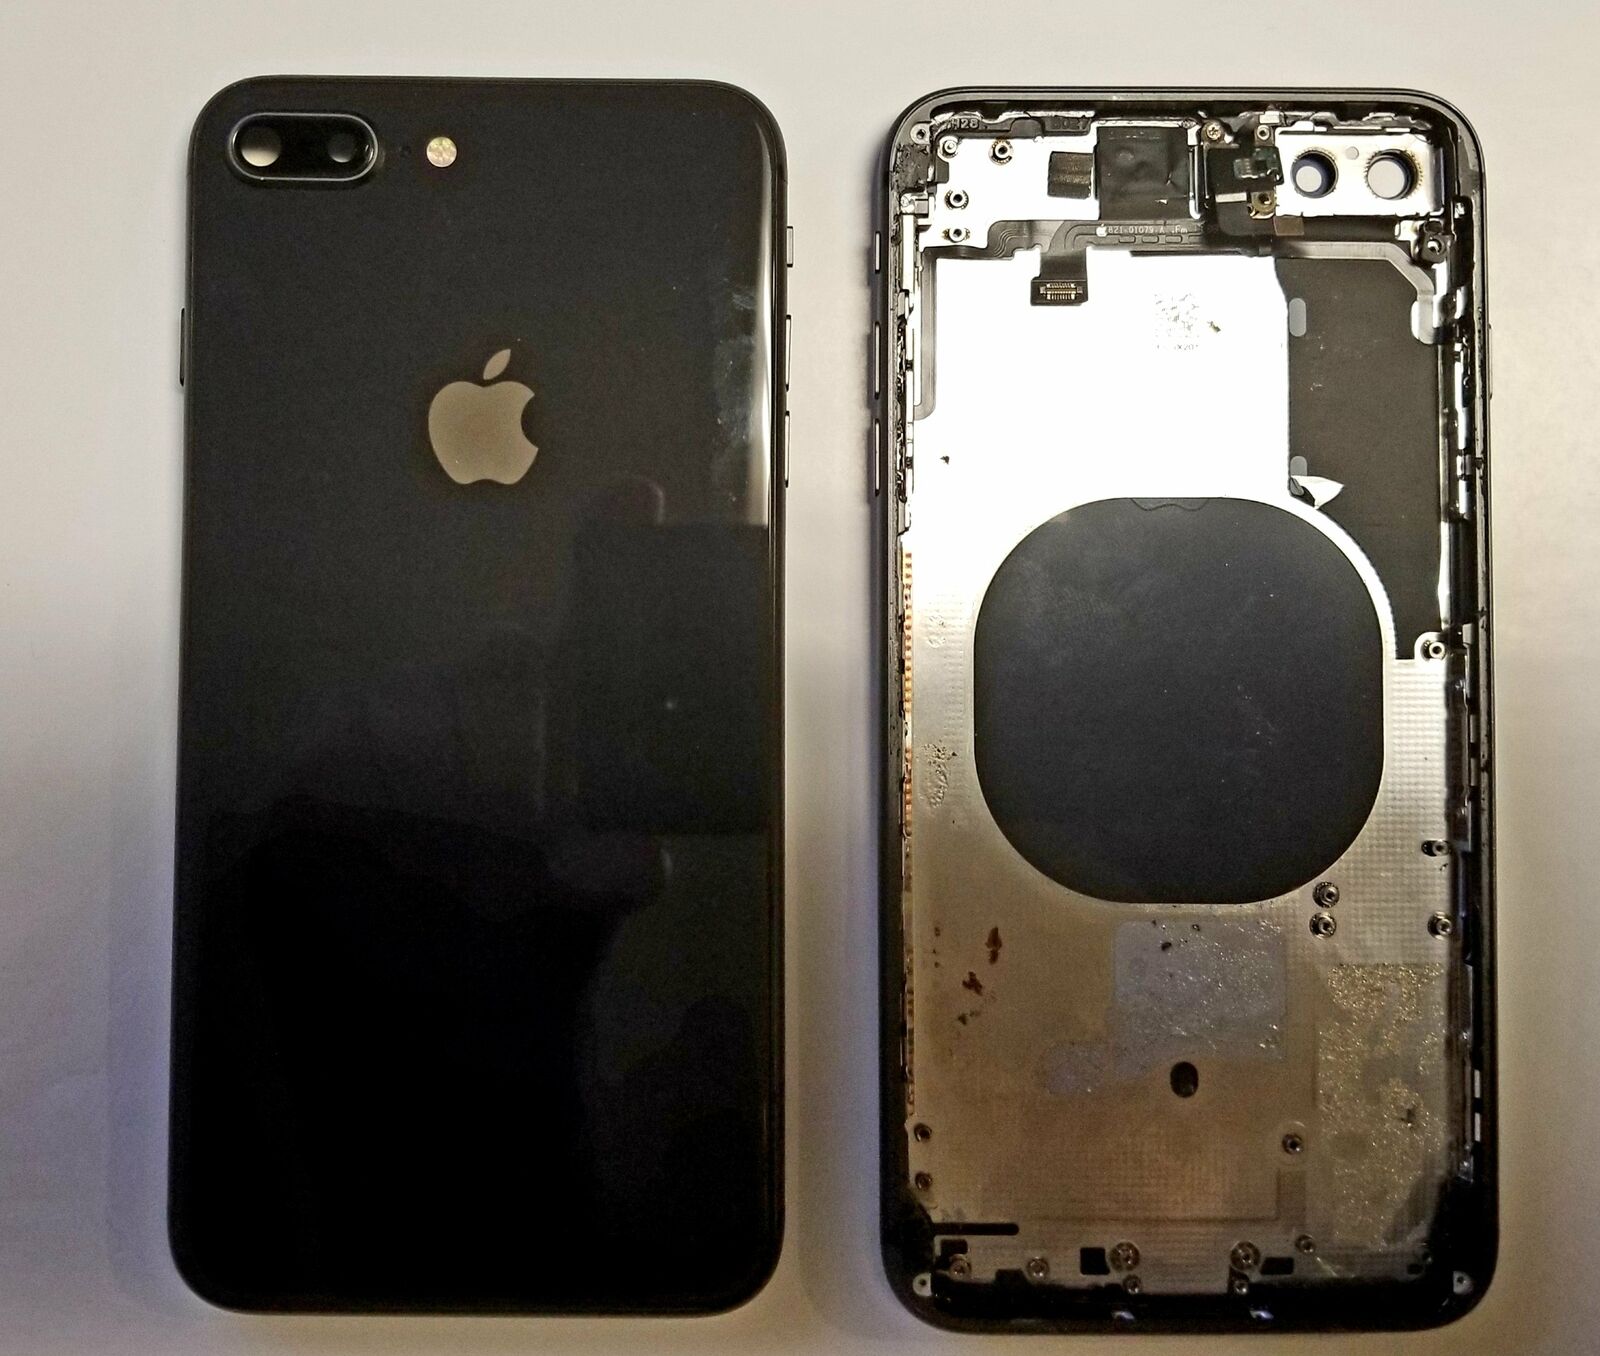 Compatible With iPhone 8 Plus full frame glas housing rear Sale back Clearance SALE! Limited time!